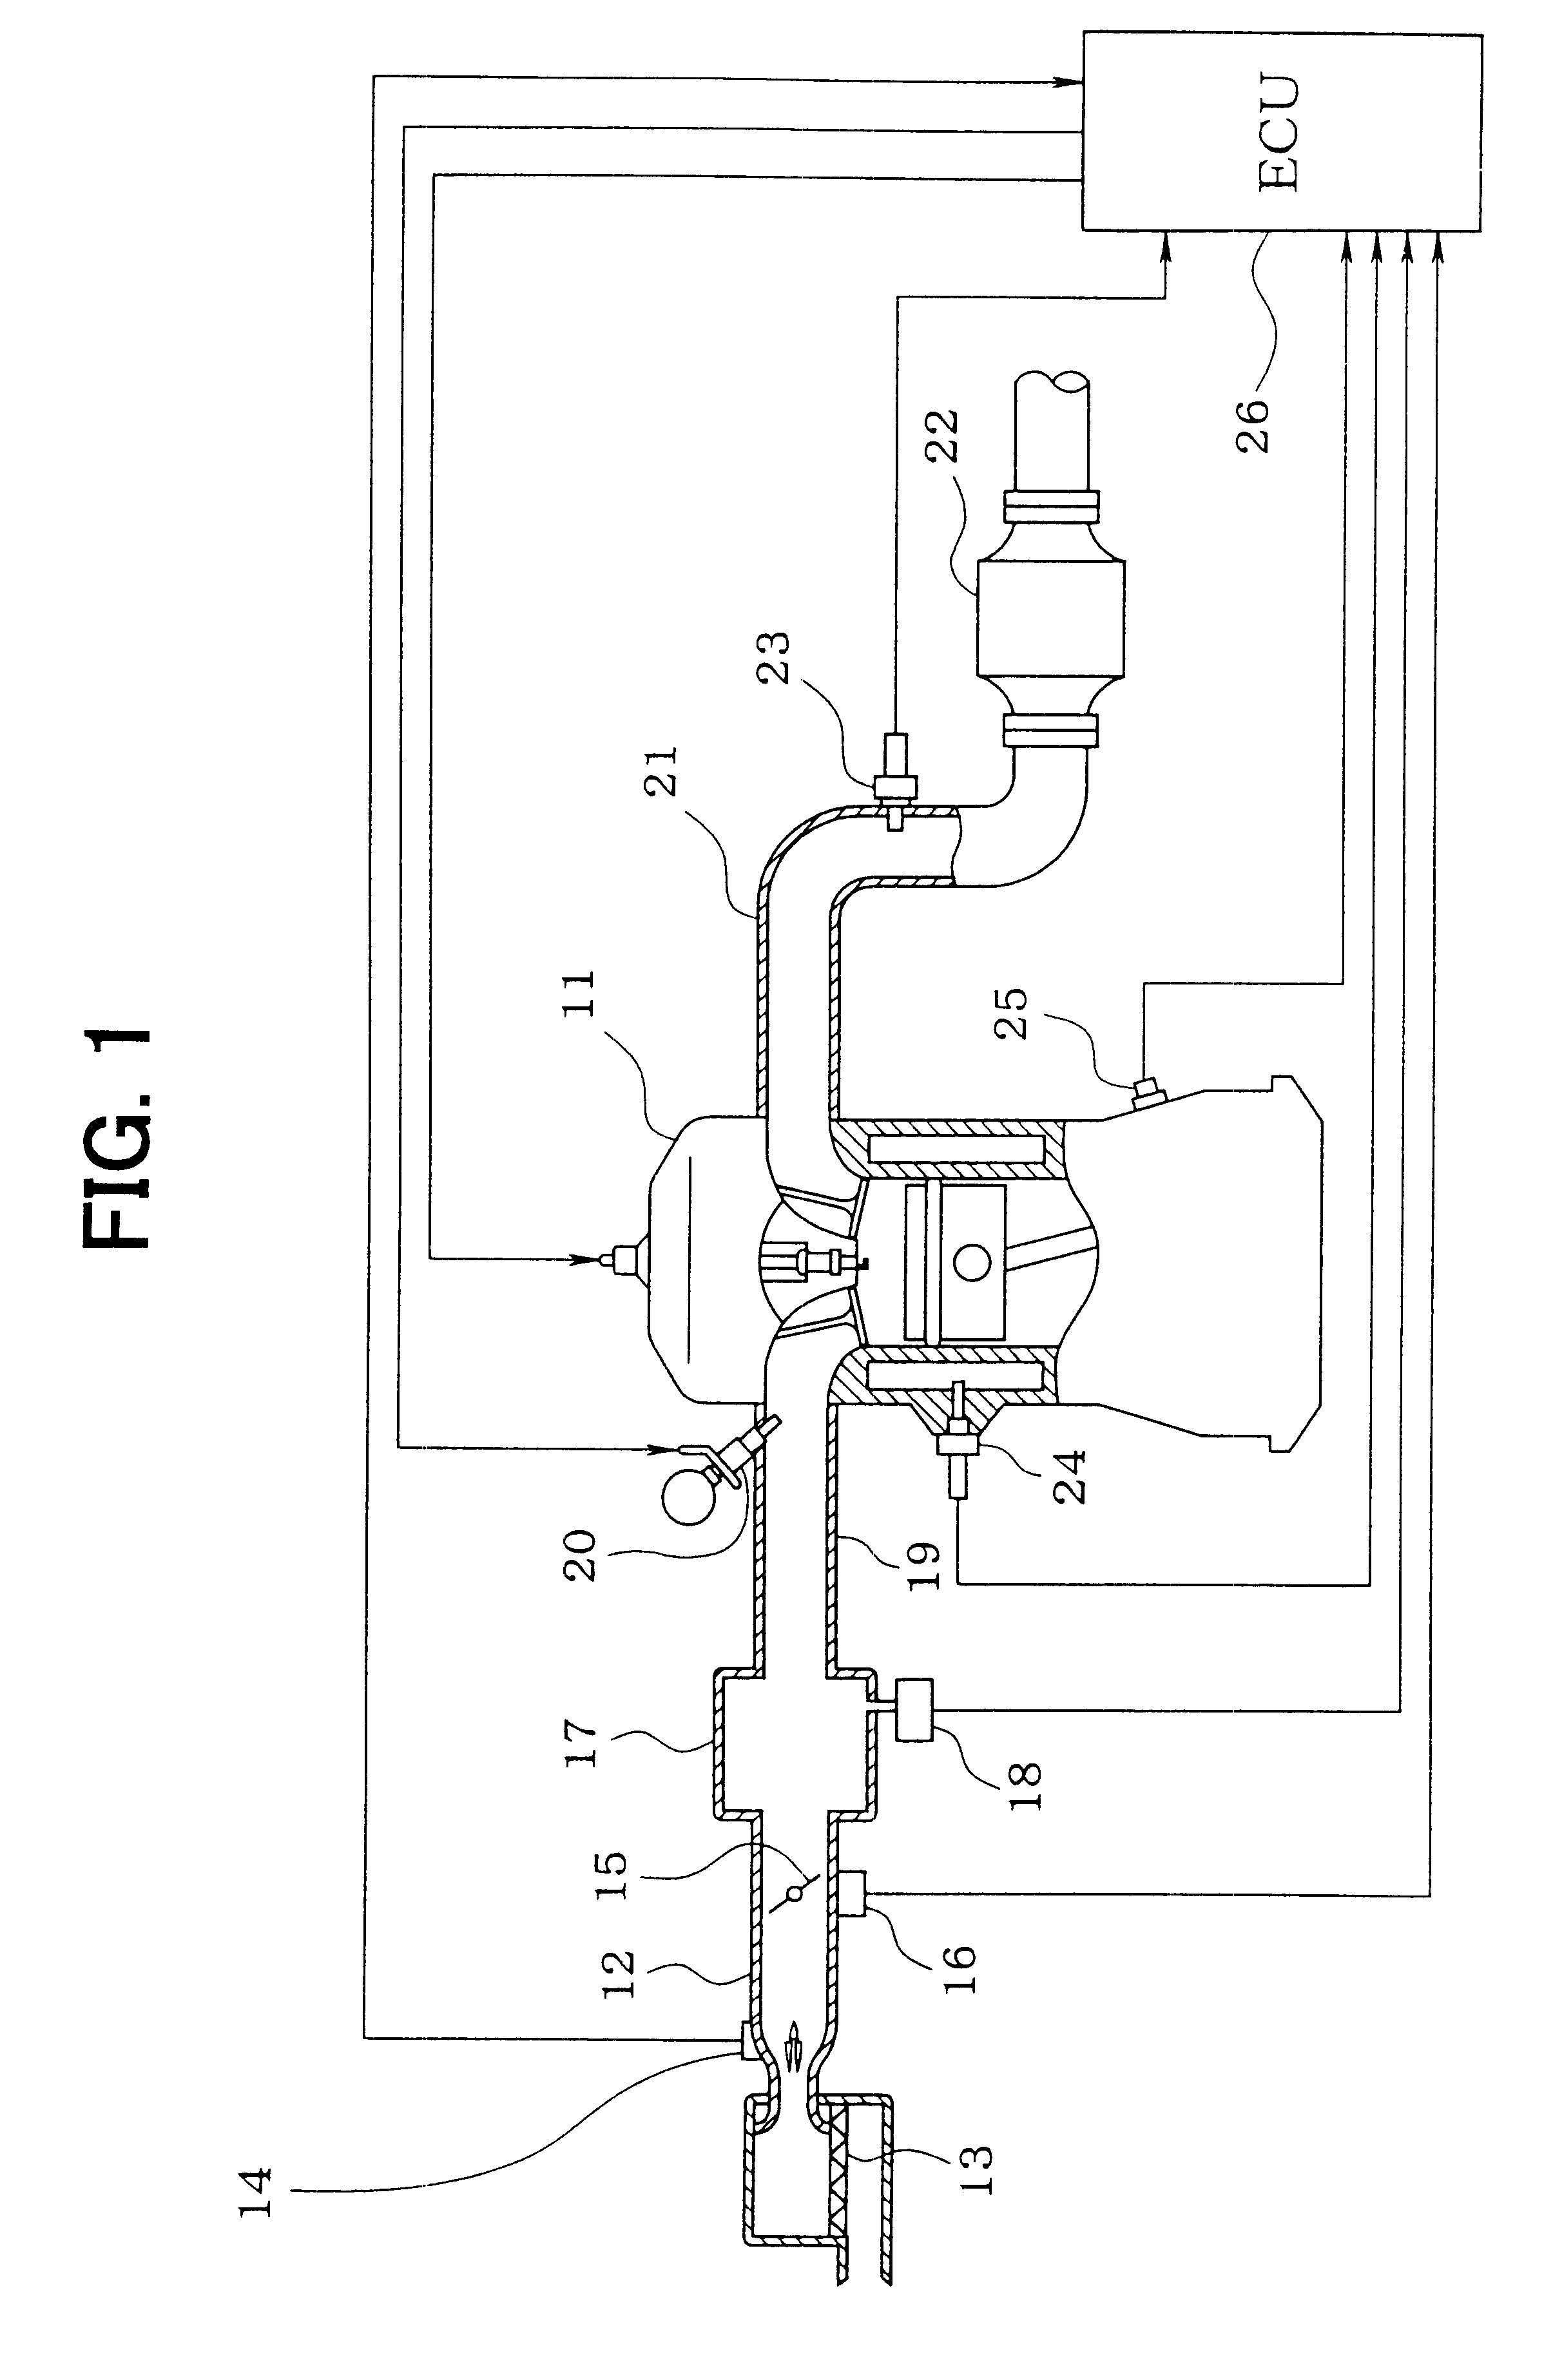 Air-fuel ratio controller of internal combustion engines